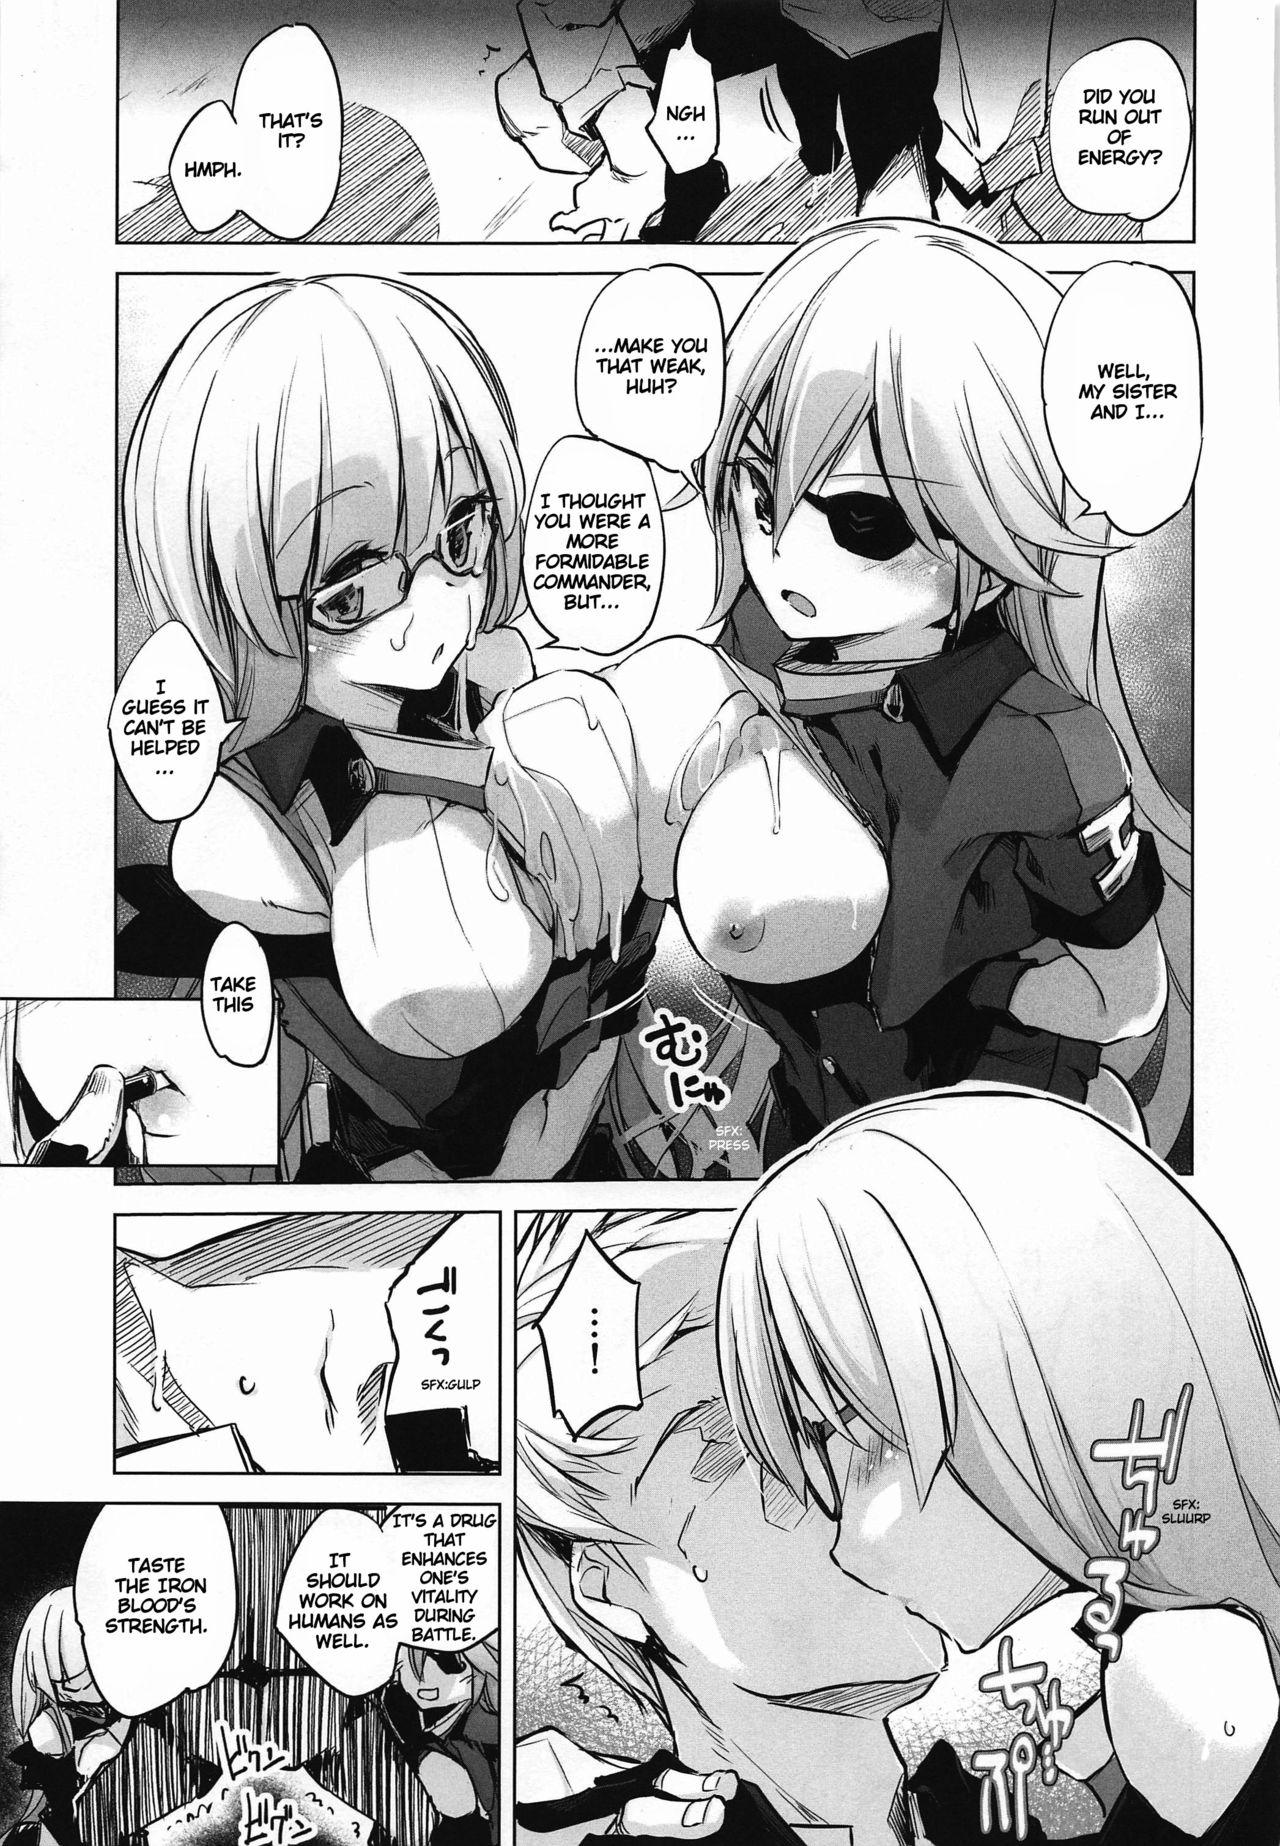 Hand Insufficient main force to shoot ! Iron-Blood Battleship and Battle Cruiser Summary Book - Azur lane French Porn - Page 8